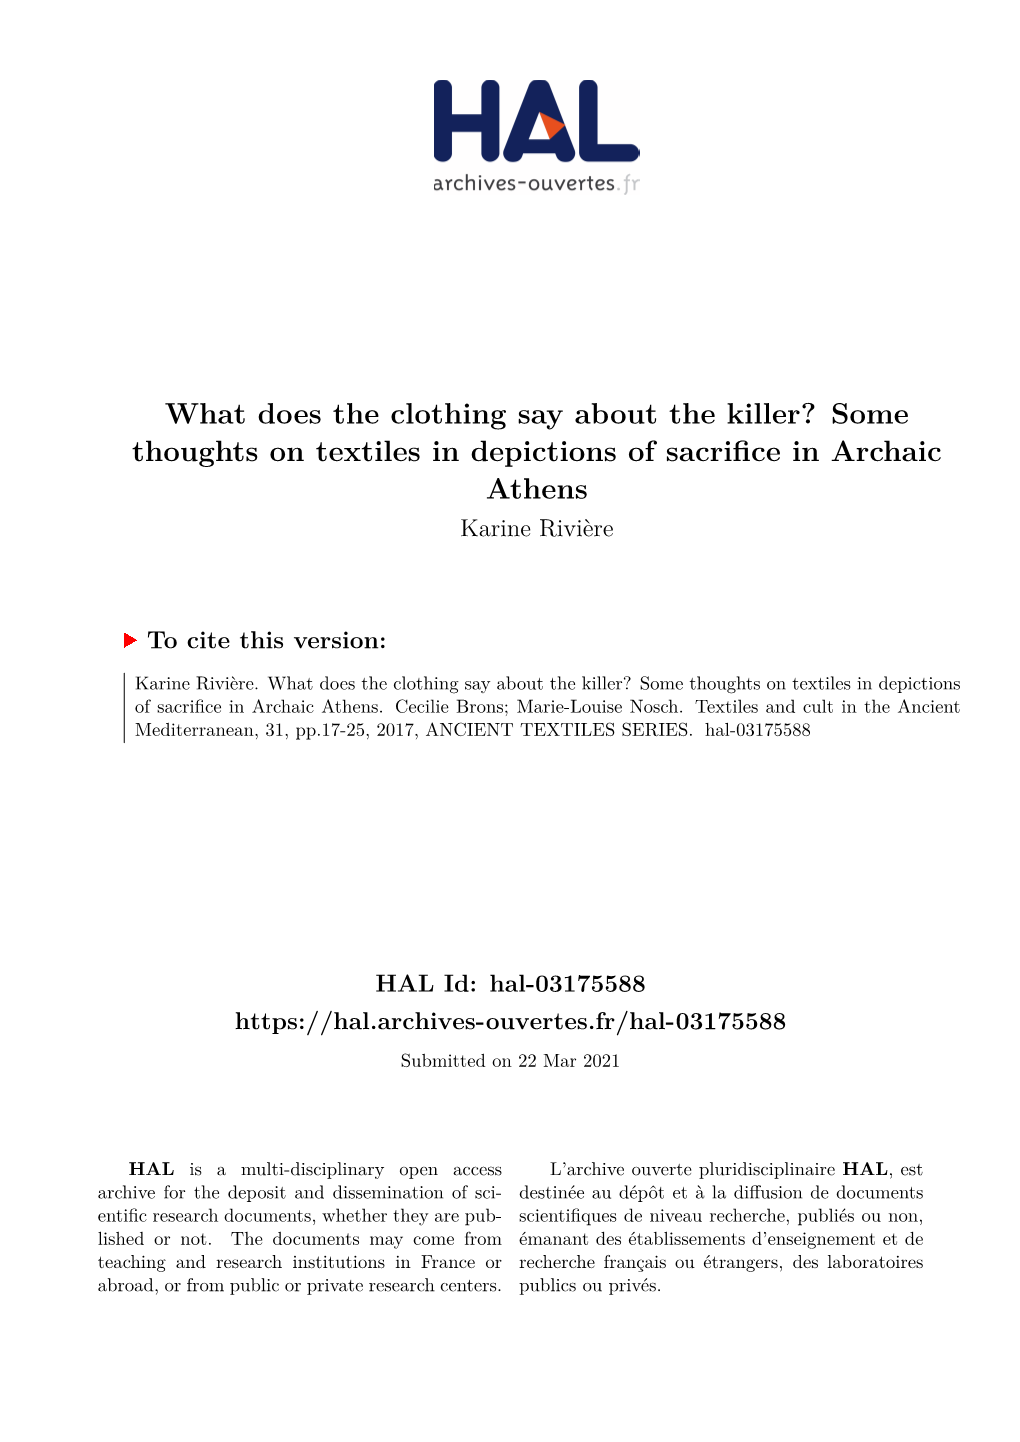 What Does the Clothing Say About the Killer? Some Thoughts on Textiles in Depictions of Sacrifice in Archaic Athens Karine Rivière